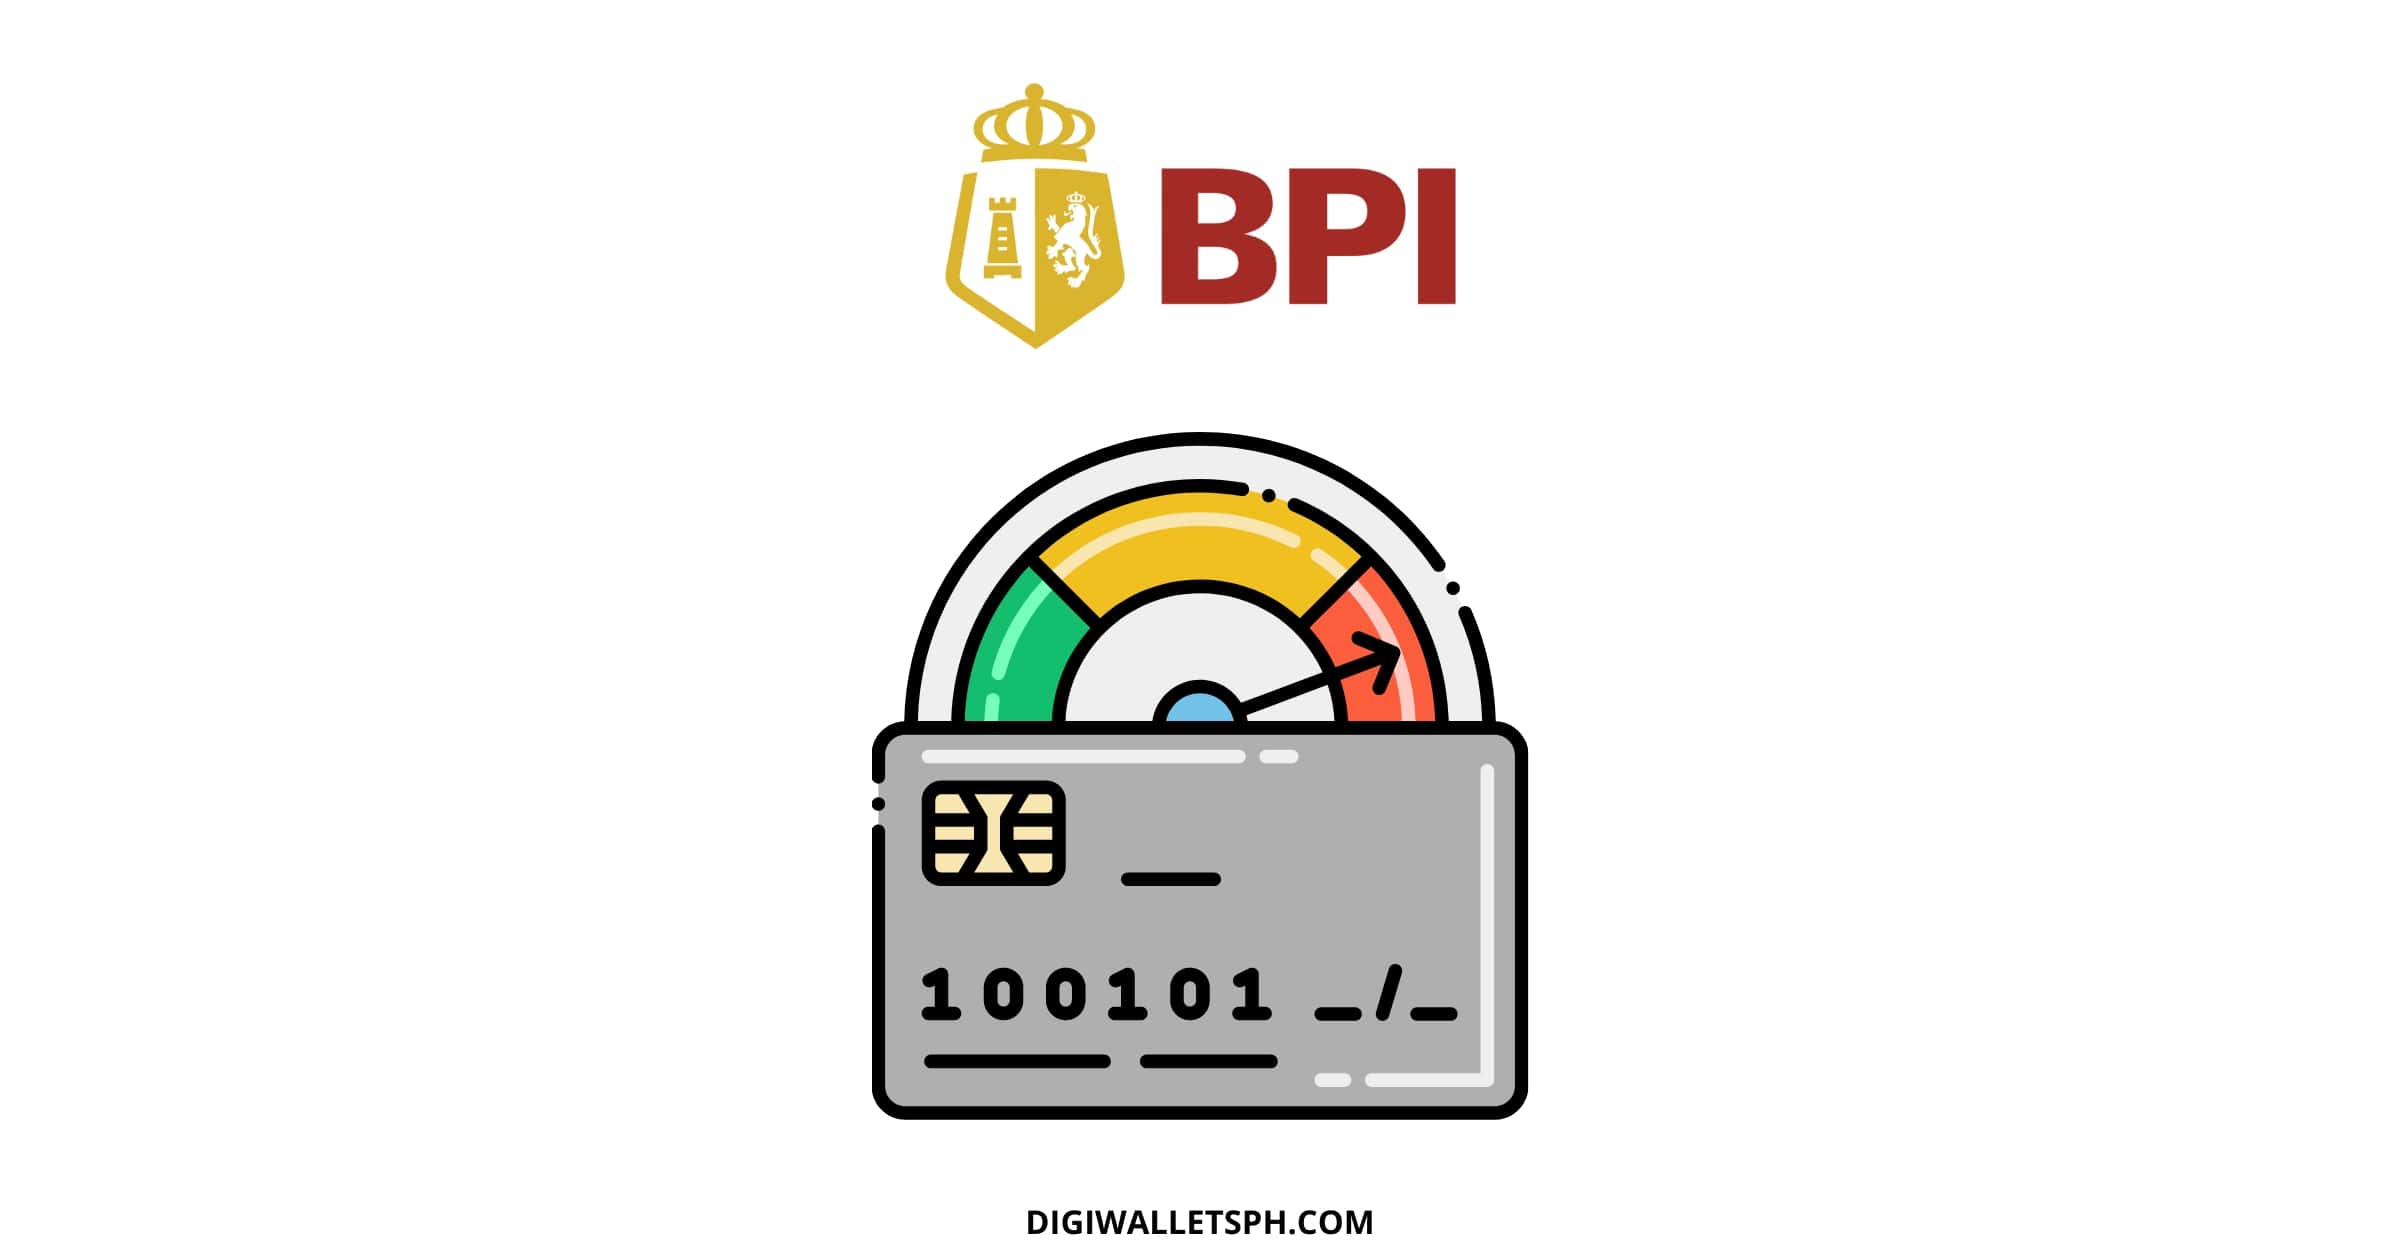 How to increase credit limit BPI